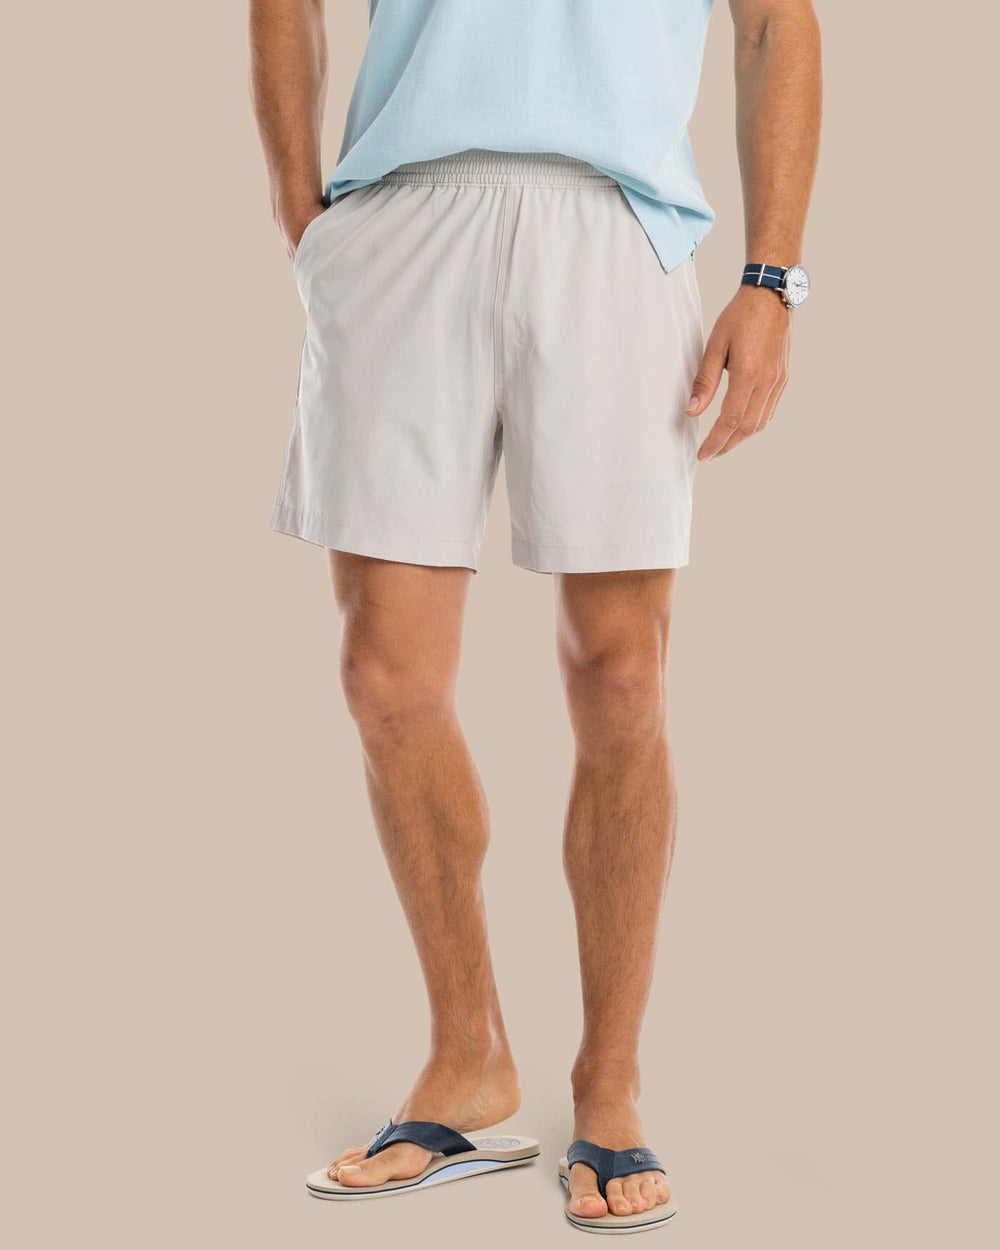 The model front view of the Men's Rip Channel 6 Inch Performance Short by Southern Tide - Marble Grey